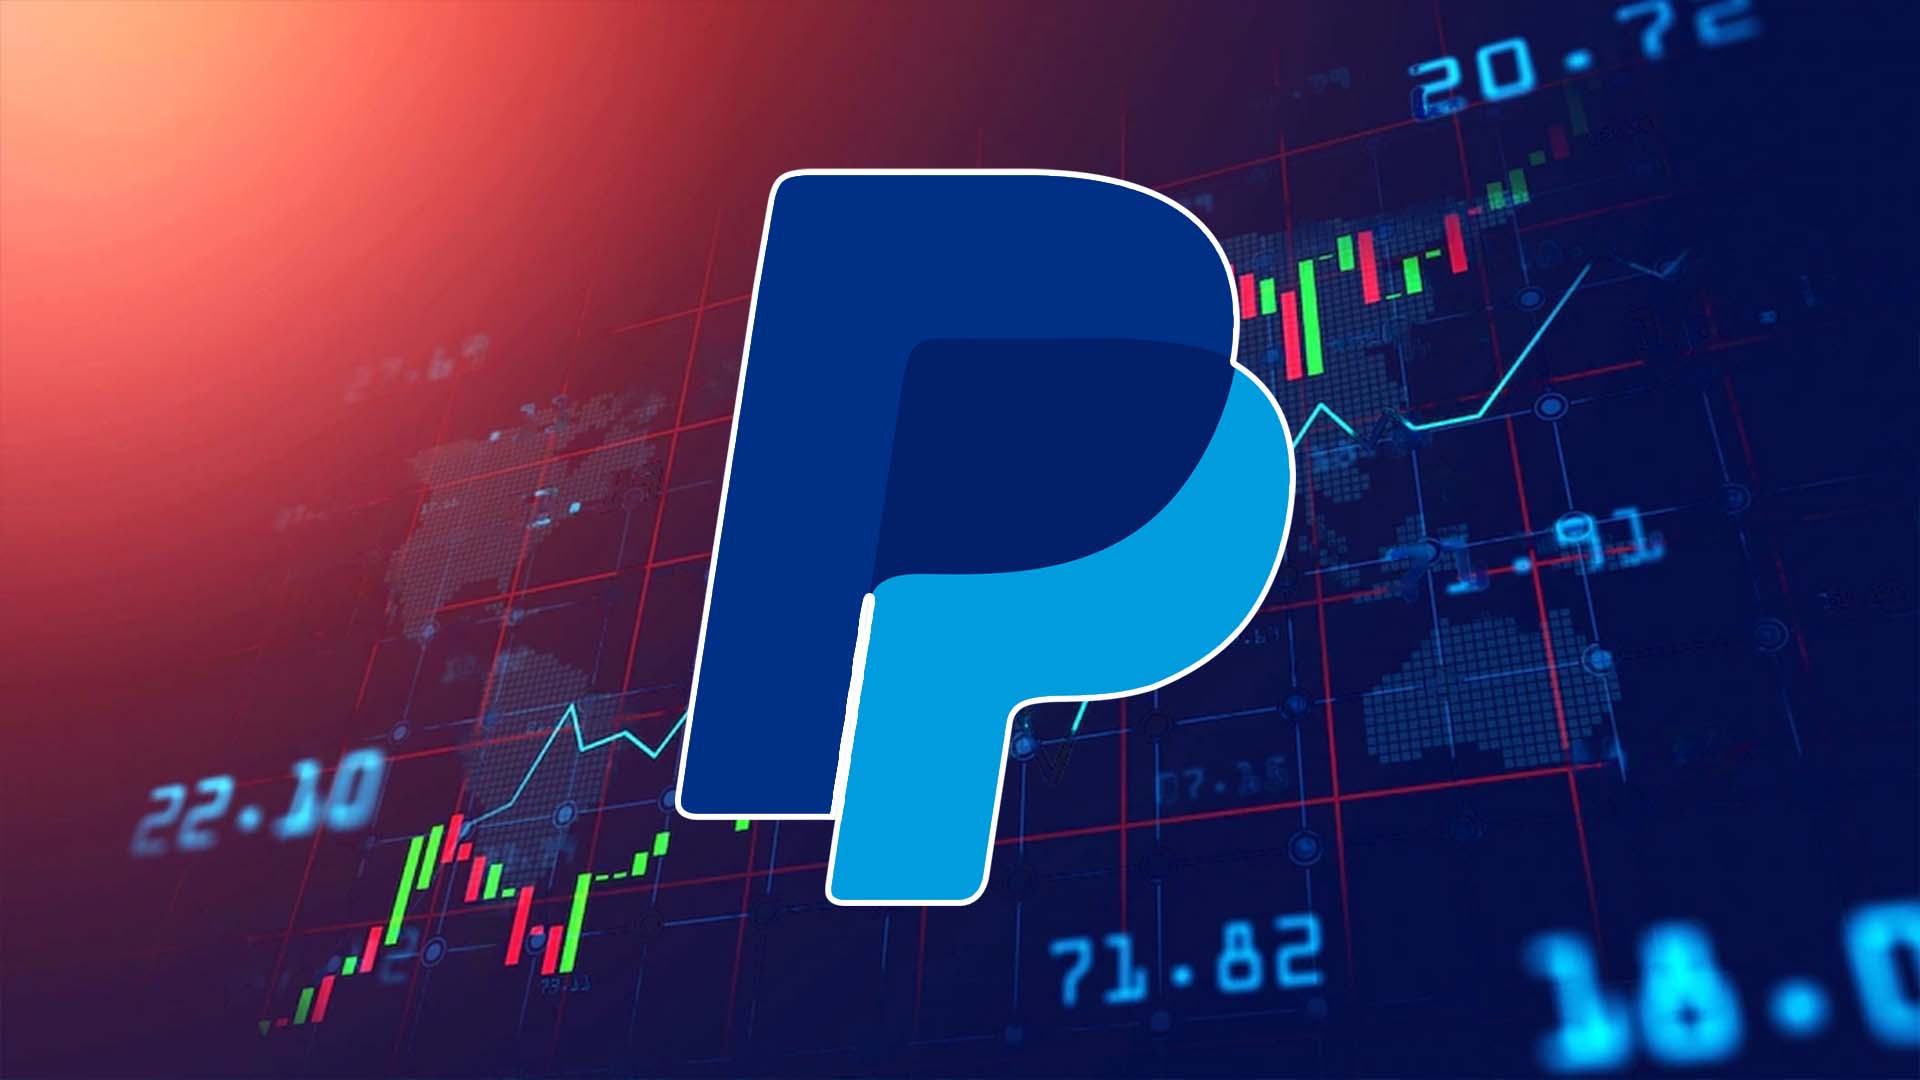 Paypal Stock Price: Q3 Results Continue PYPL’s Bullish Trend, Key Support-100 DMA